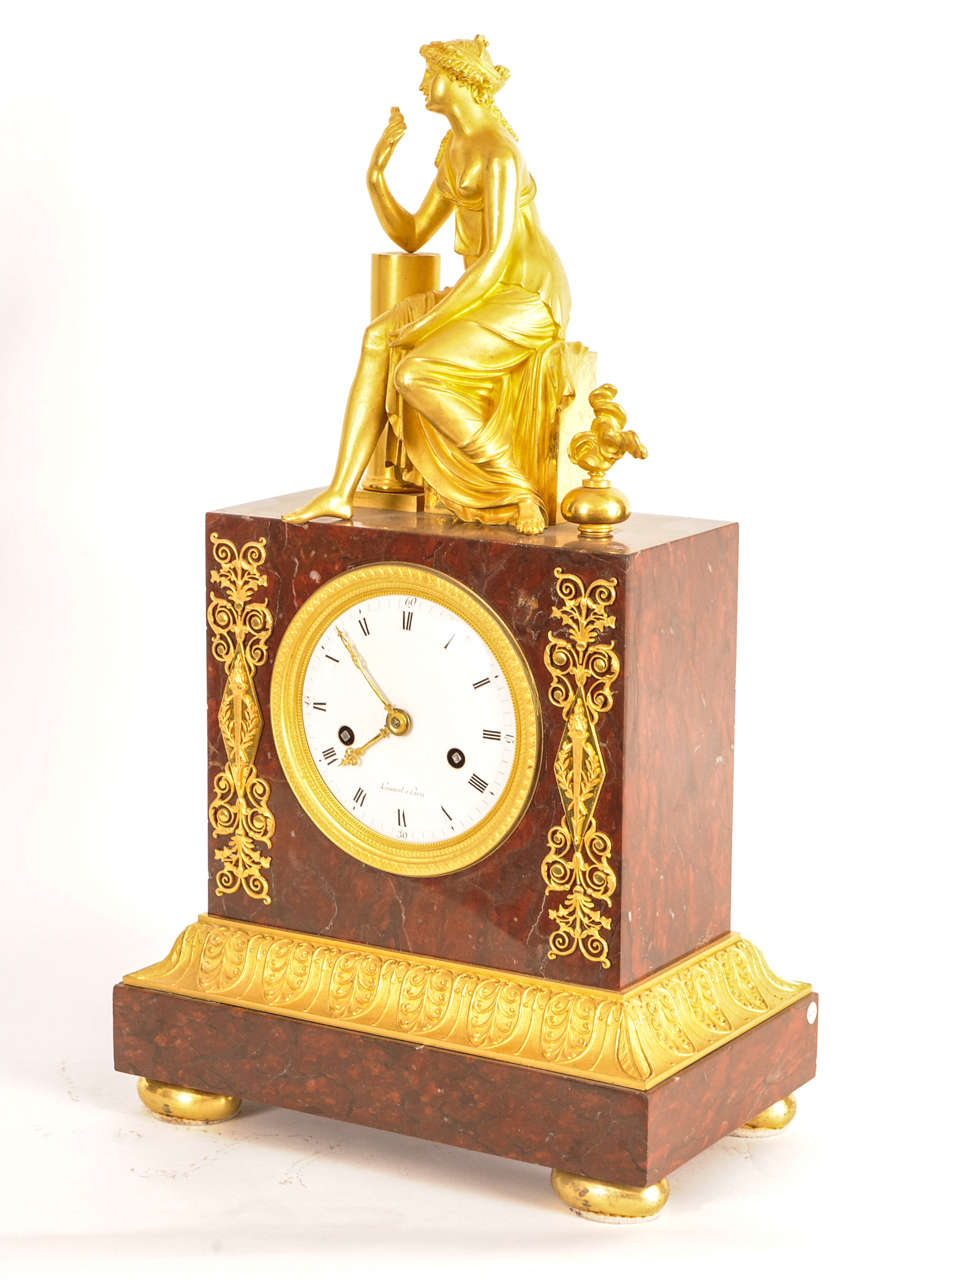 striking, with the figure of a seated woman on top, the dial signed 'Lamiral A Paris'.